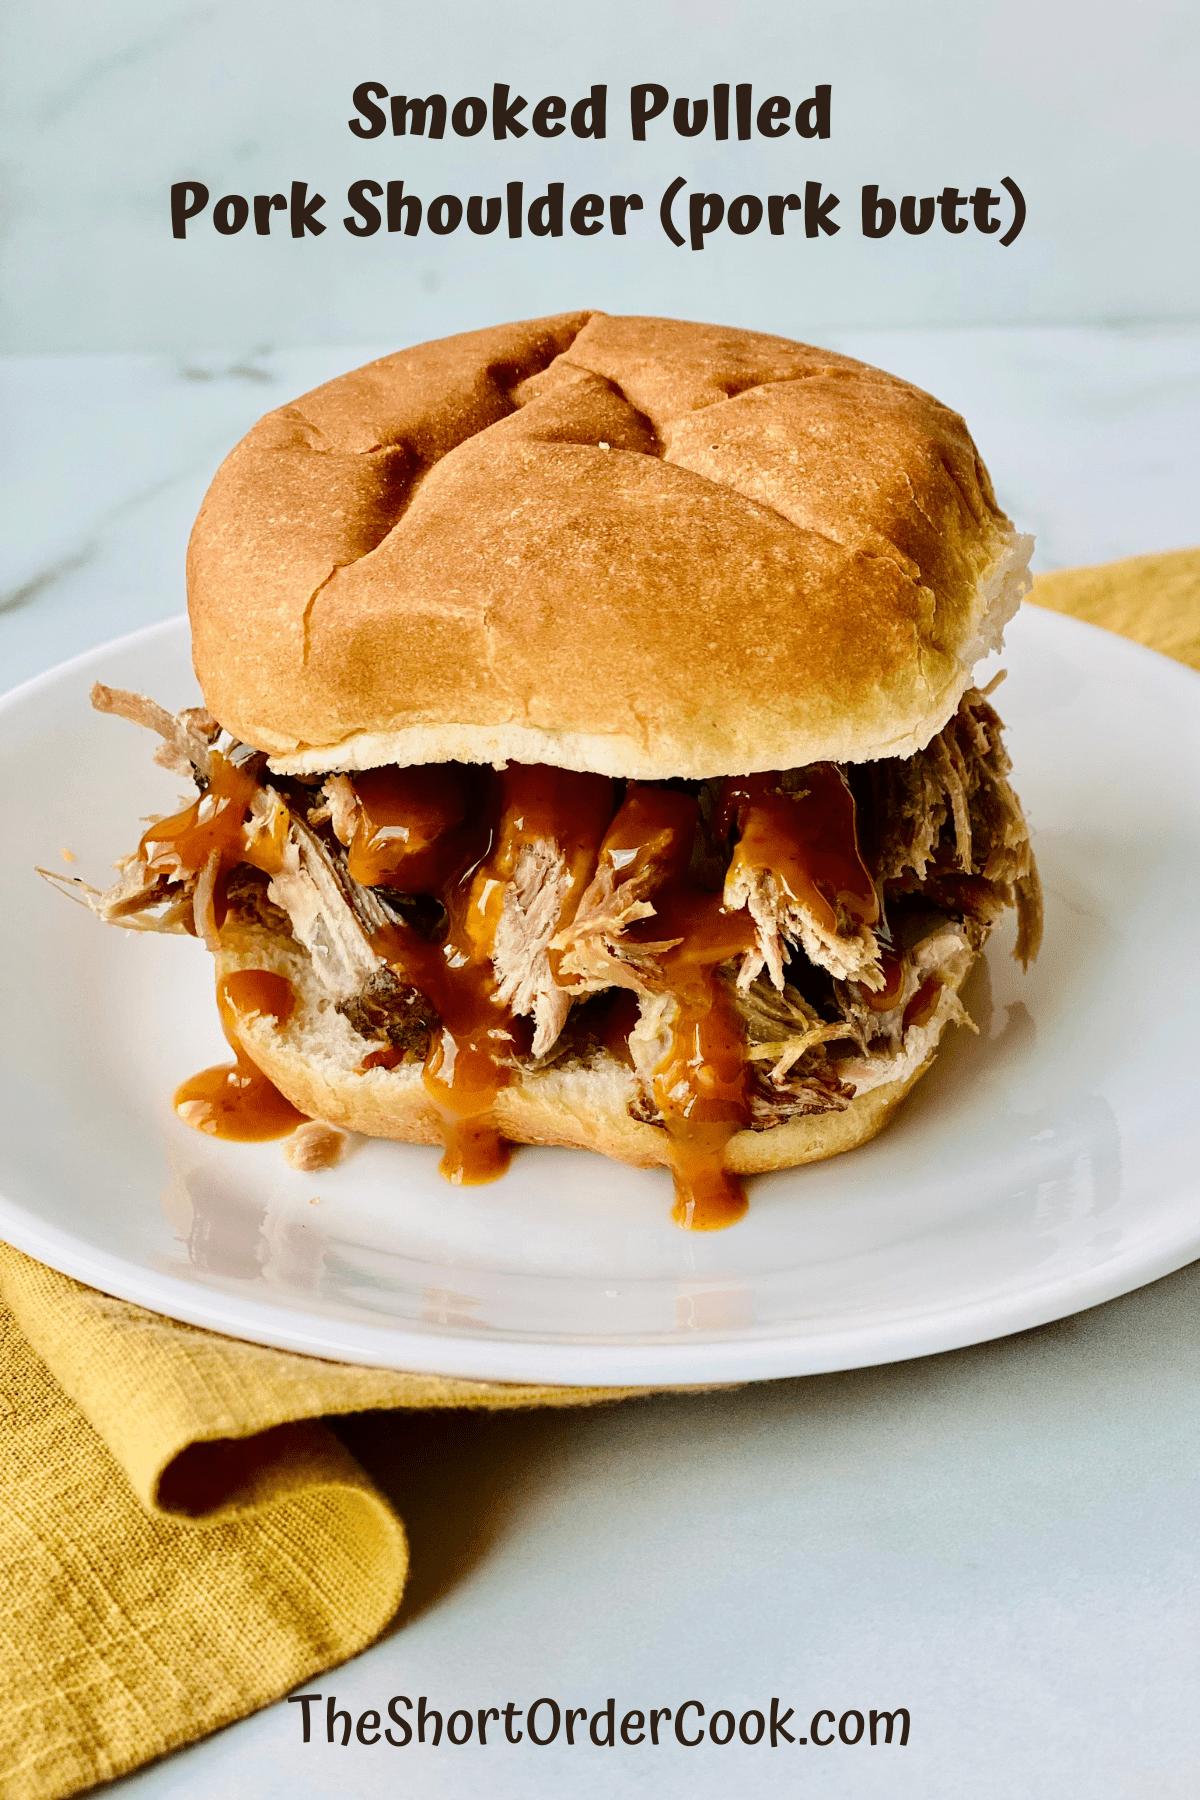 Smoked Pulled Pork Shoulder (pork butt) on a bun with bbq sauce.